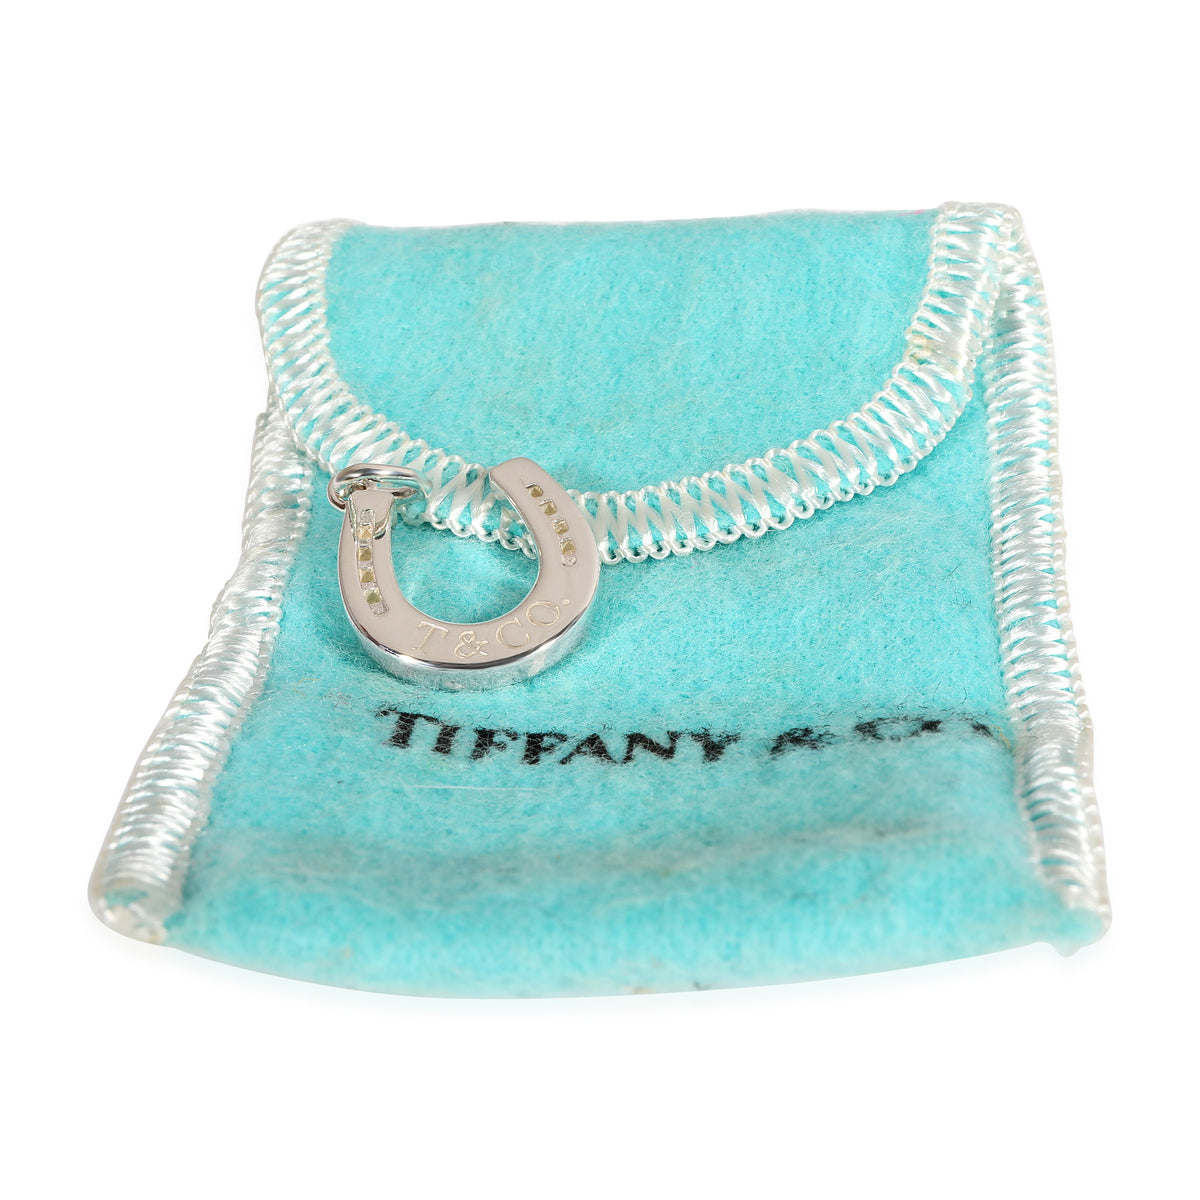 Tiffany & Co. Horseshoe Charm in Sterling Silver